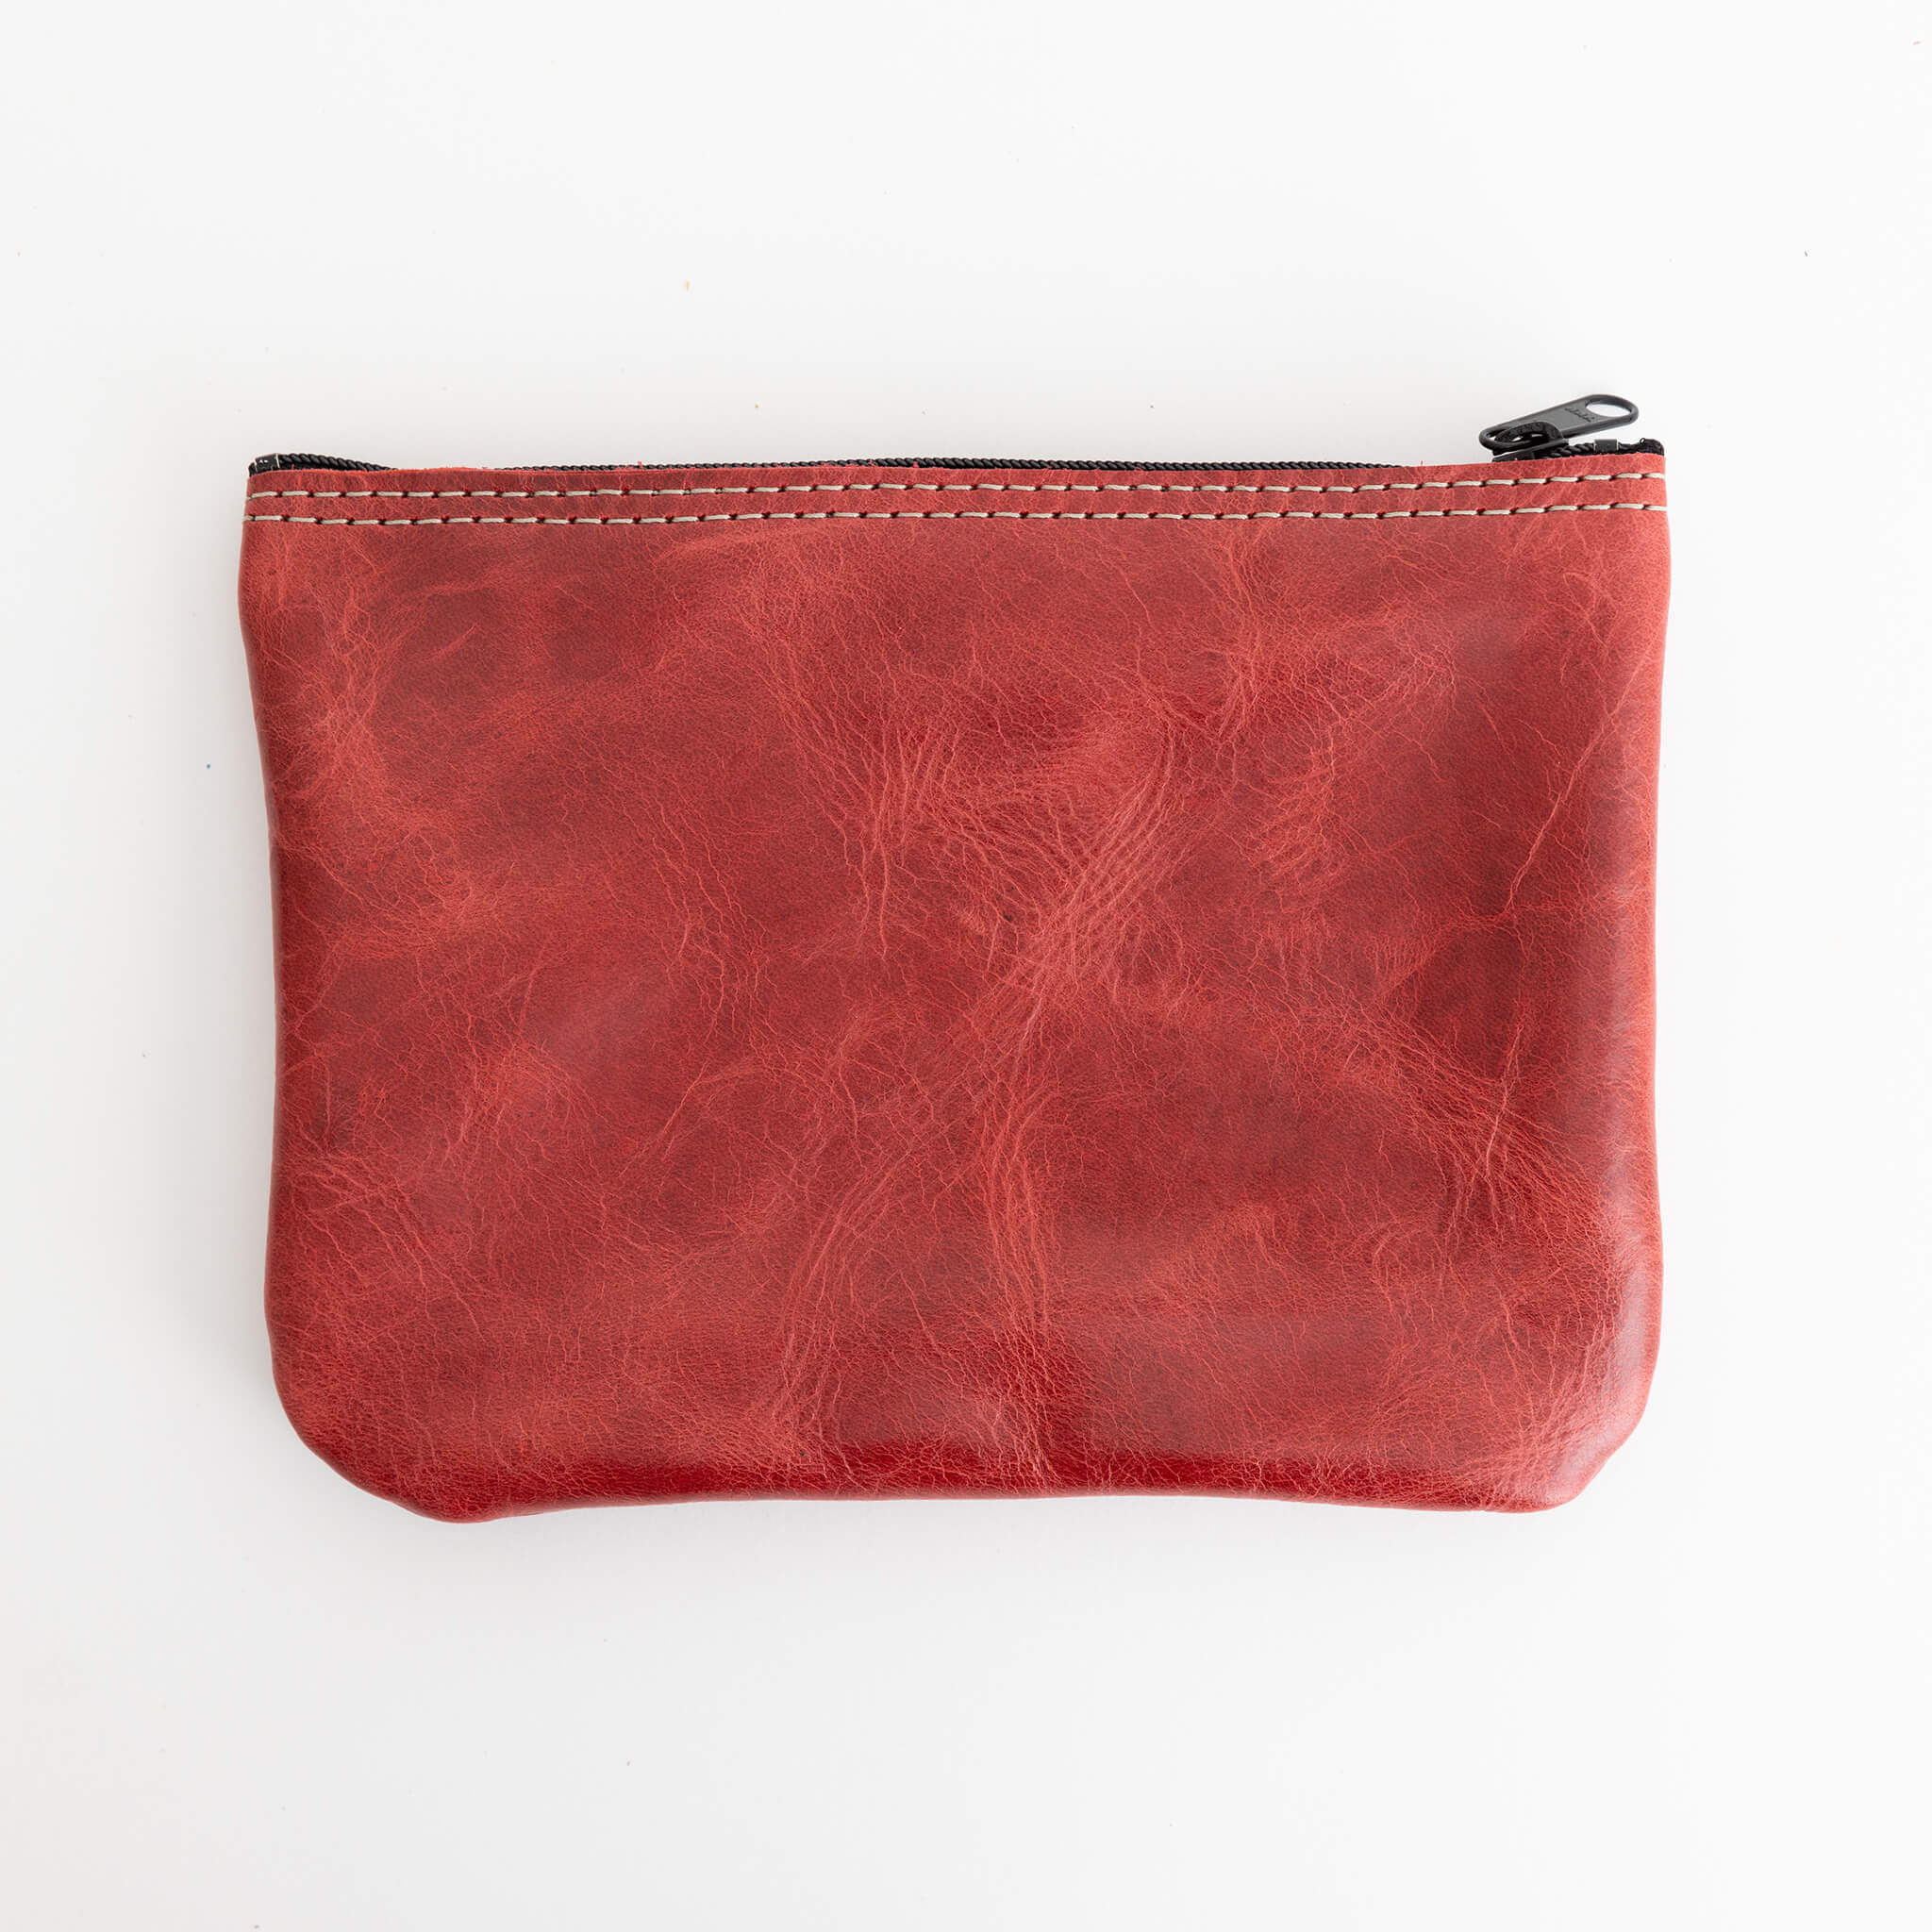 perfect pouch unisex zipper bag - handmade leather - cardinal front view